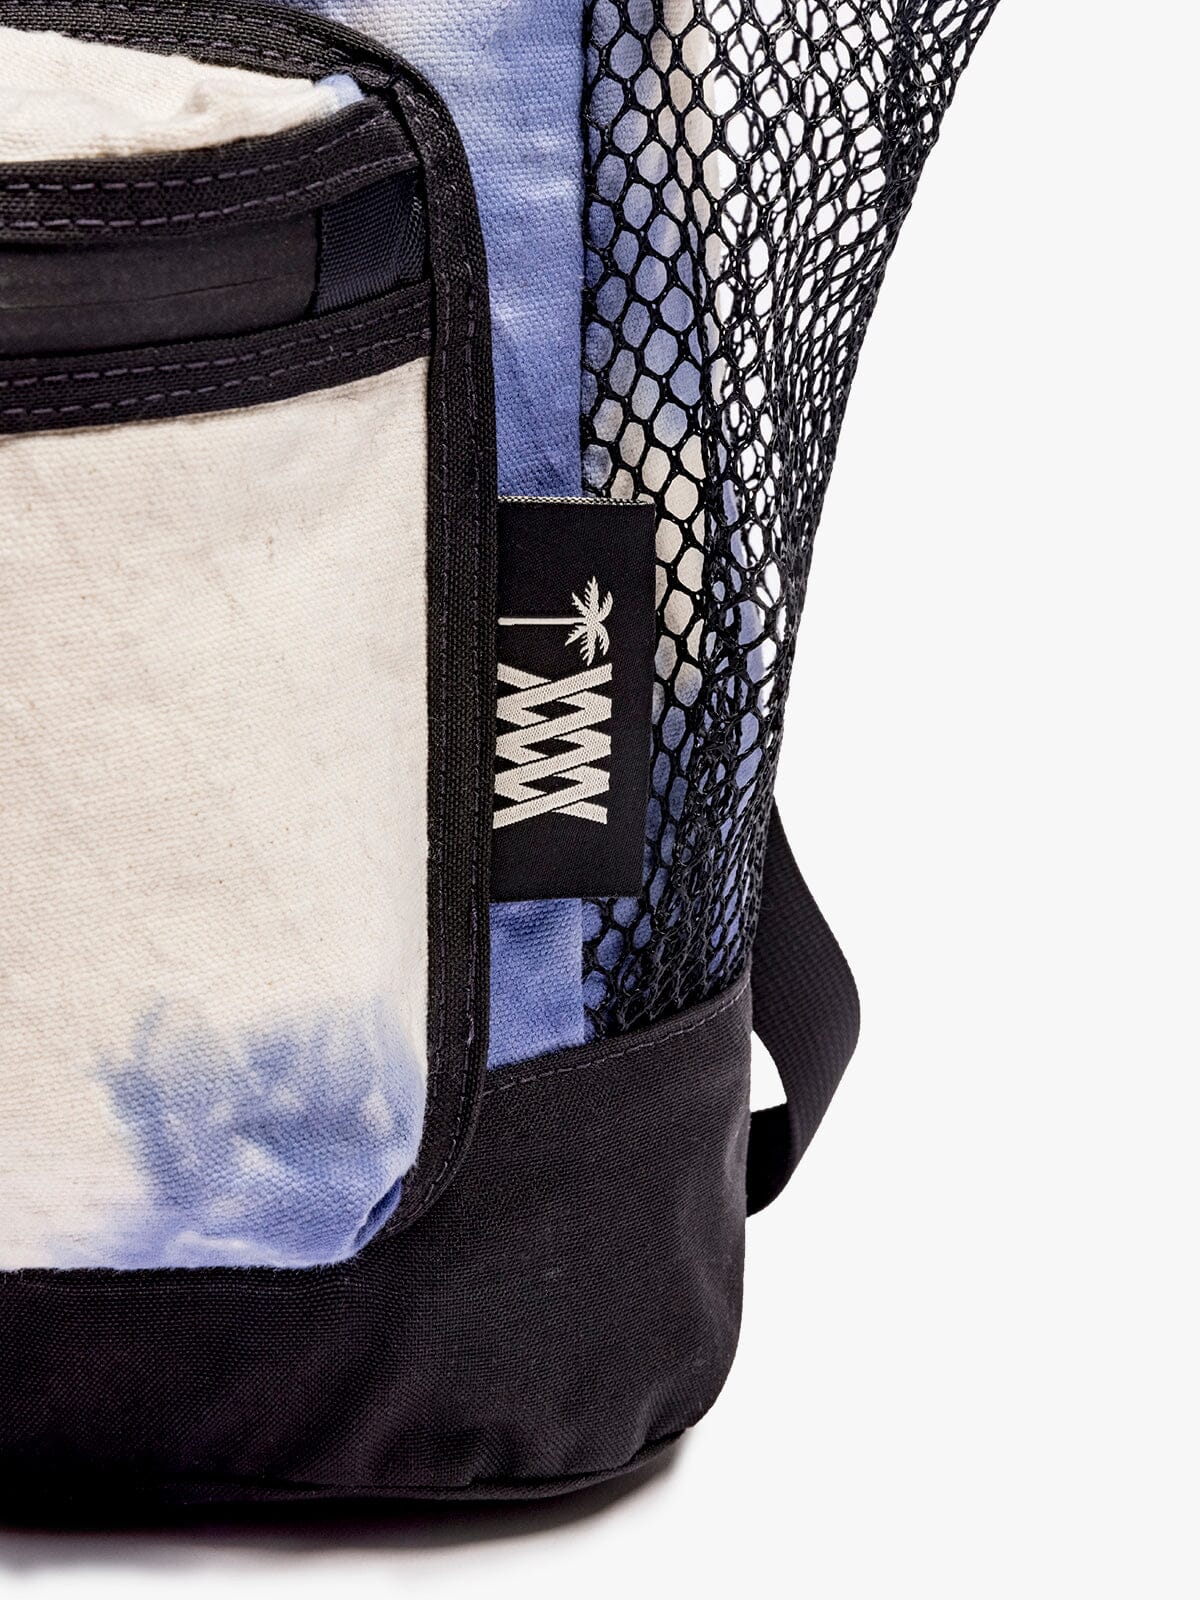 MW x ASP Stratus Ruck by Mission Workshop - Weatherproof Bags & Technical Apparel - San Francisco & Los Angeles - Built to endure - Guaranteed forever